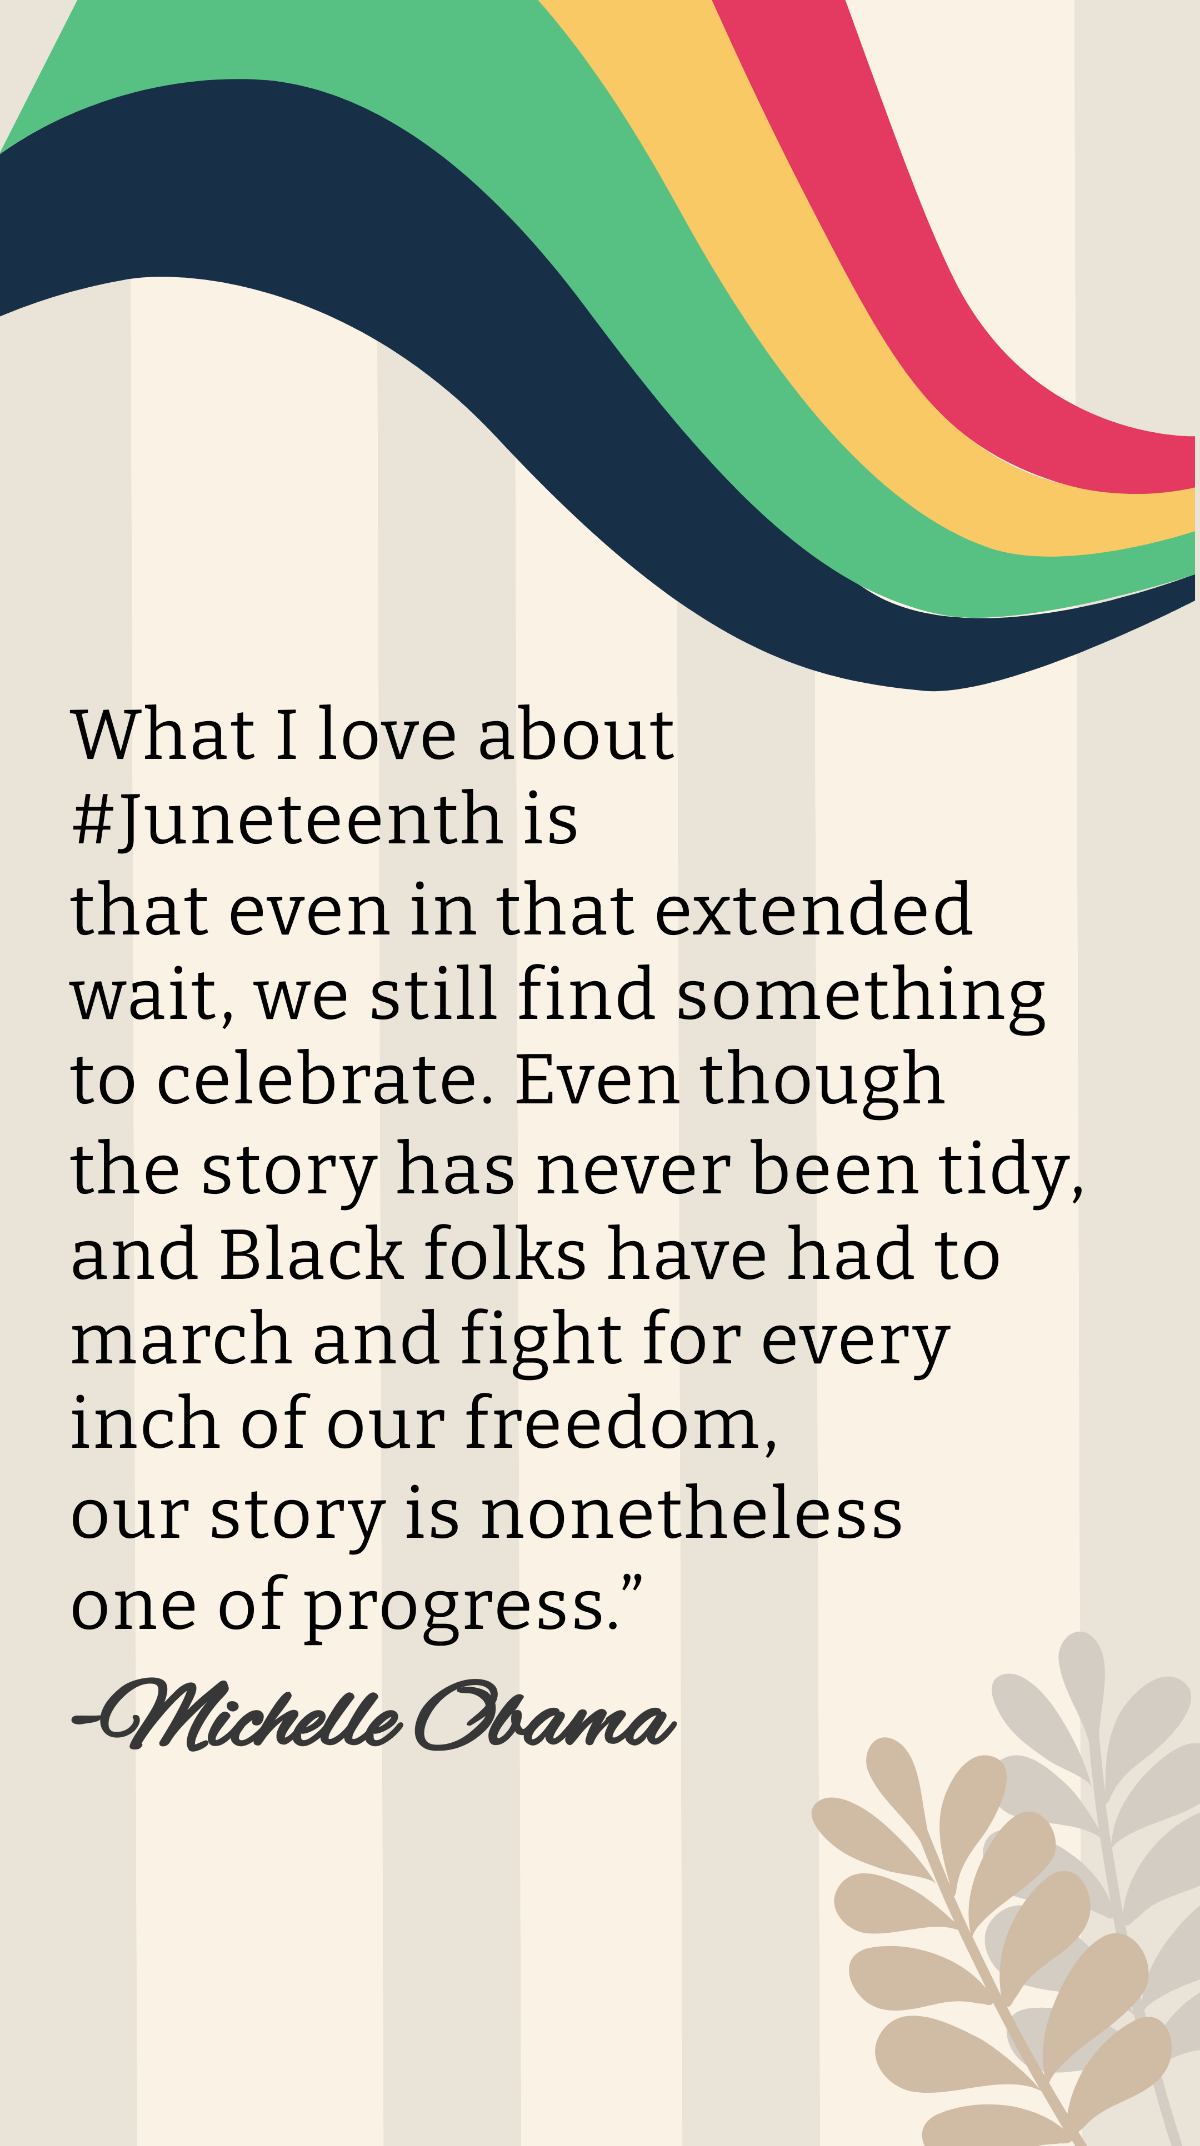 Free Michelle Obama - What I love about #Juneteenth is that even in that extended wait, we still find something to celebrate. Even though the story has never been tidy, and Black folks have had to march an